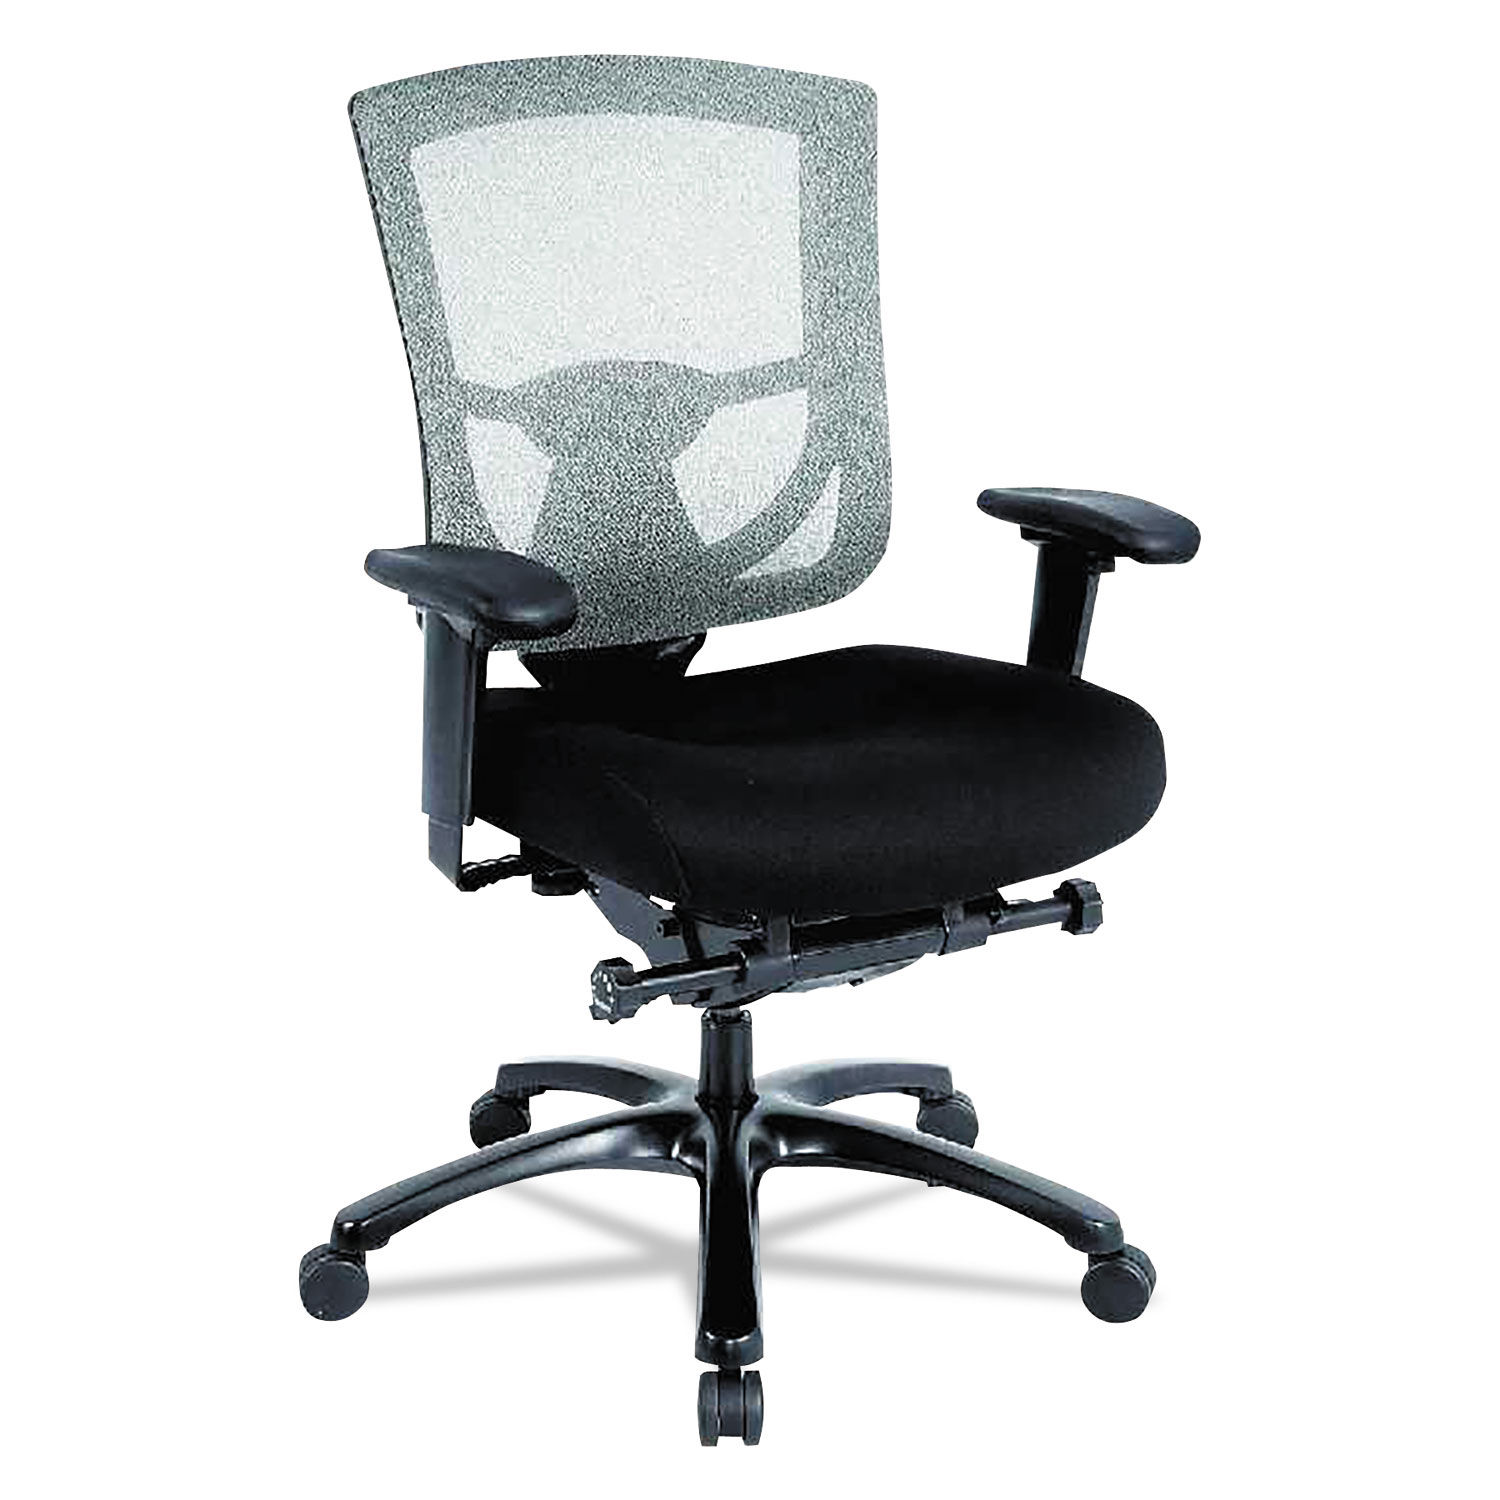 600 Mesh Back Multifunction Chair By Tempur Pedic By Raynor